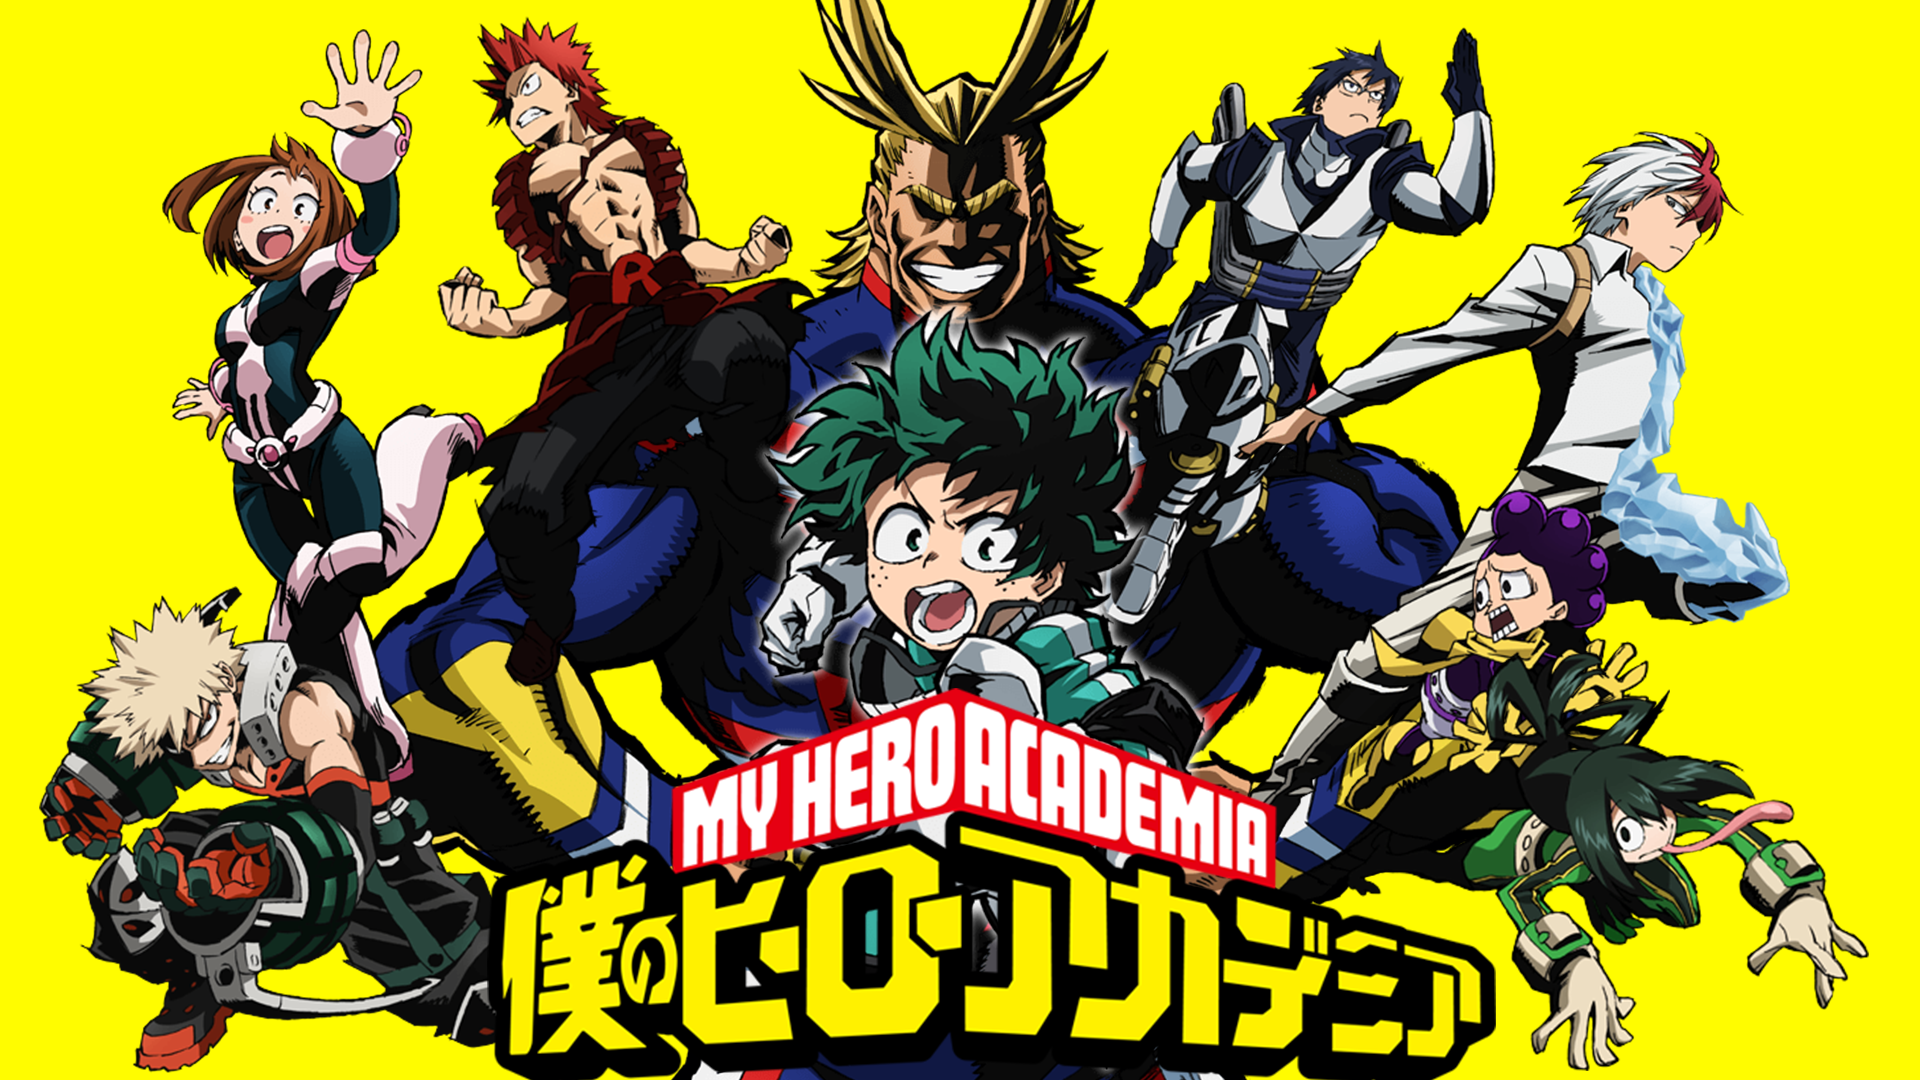 PS4 And Nintendo Switch My Hero Academia Game Revealed